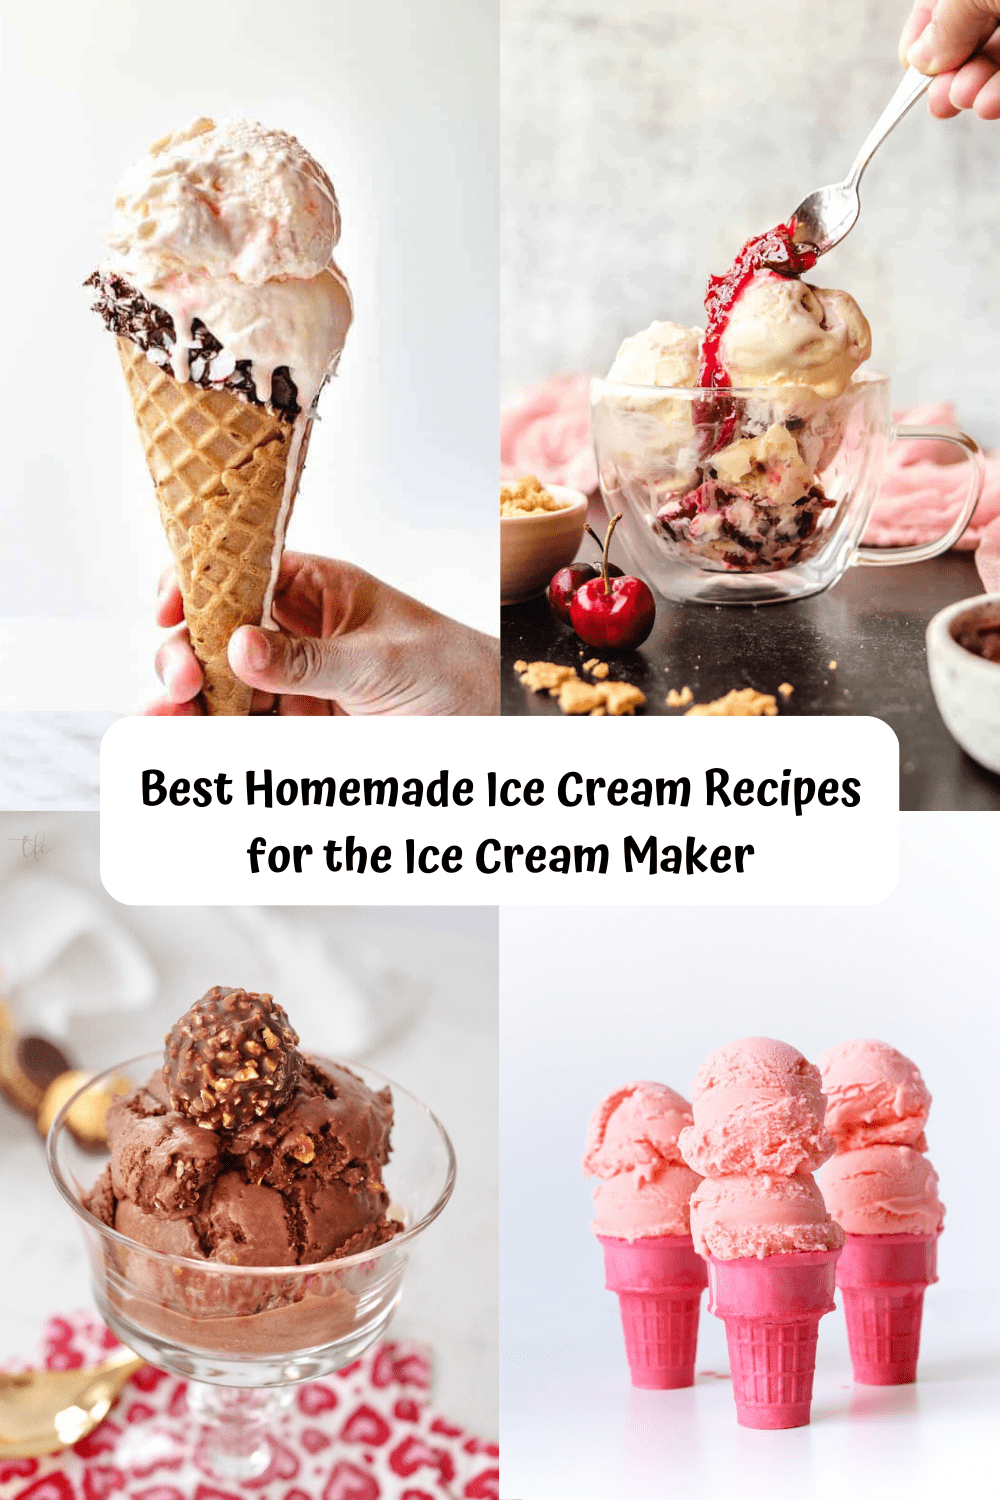 4 recipes images for different flavors of ice cream.